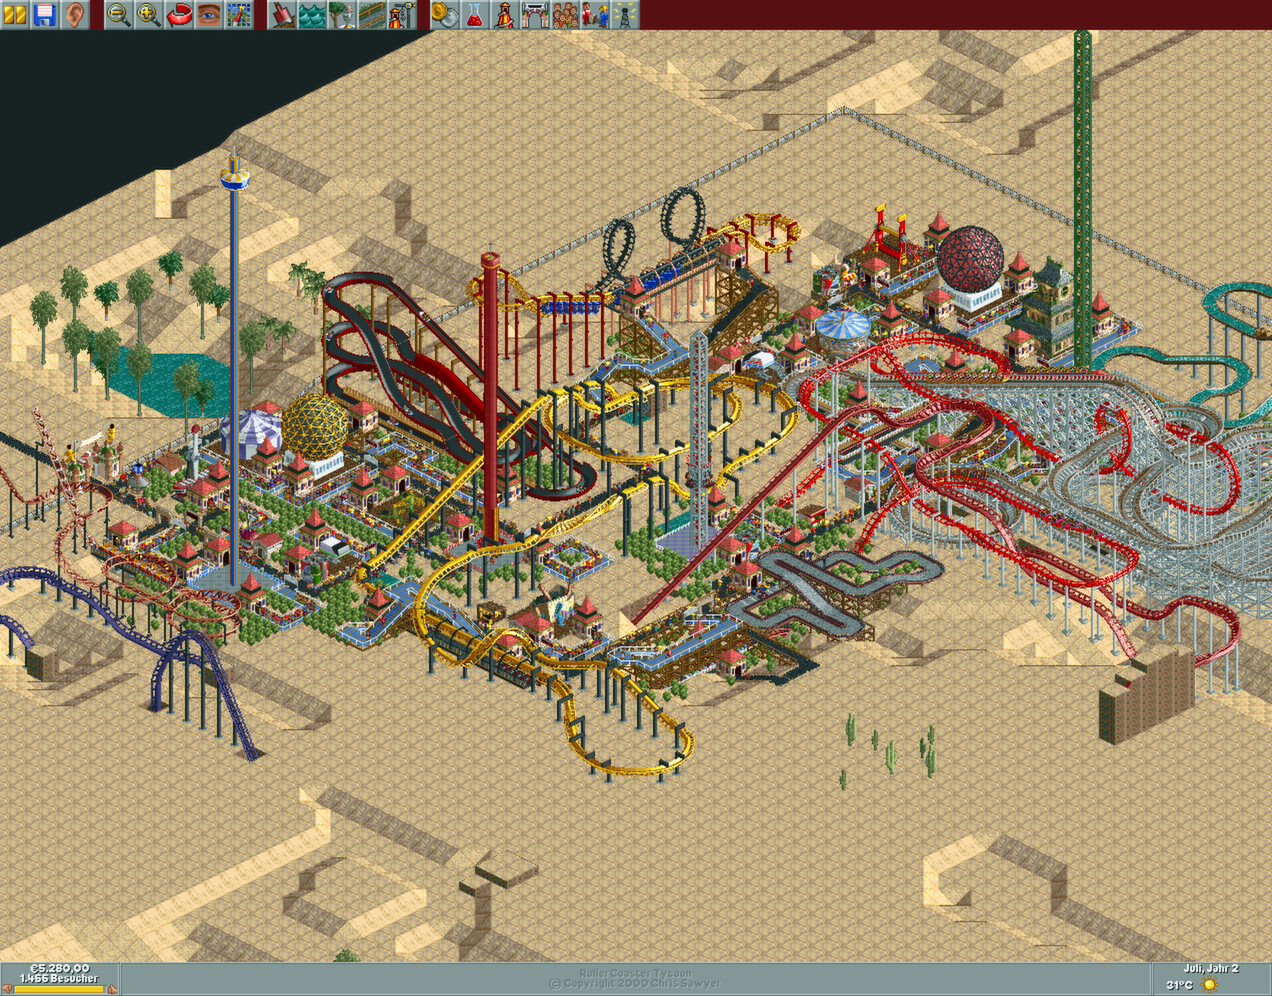 RollerCoaster Tycoon®: Deluxe on Steam